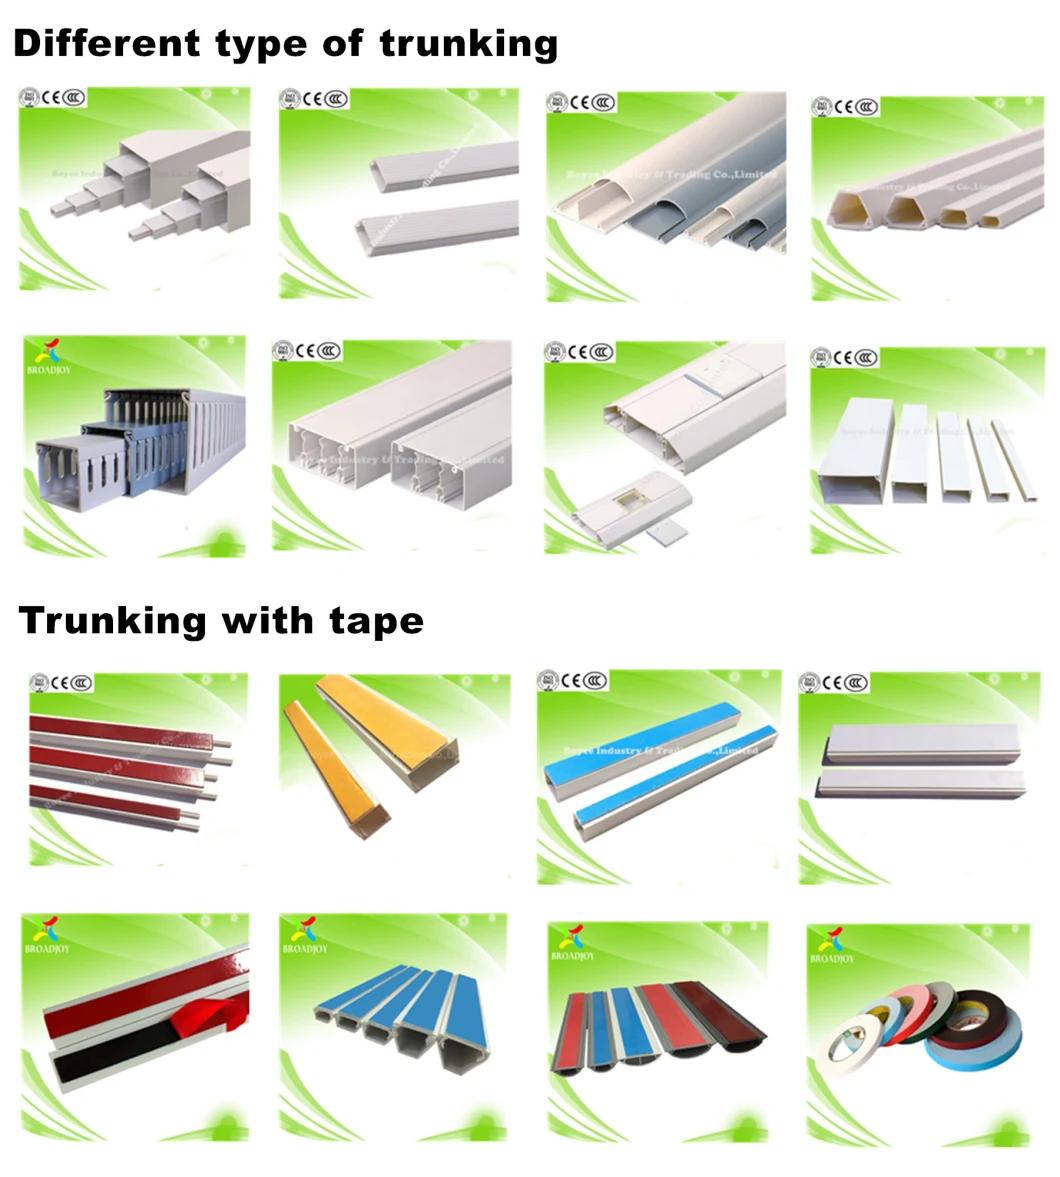 PVC Electrical Cable Wiring Channel PVC Gutter